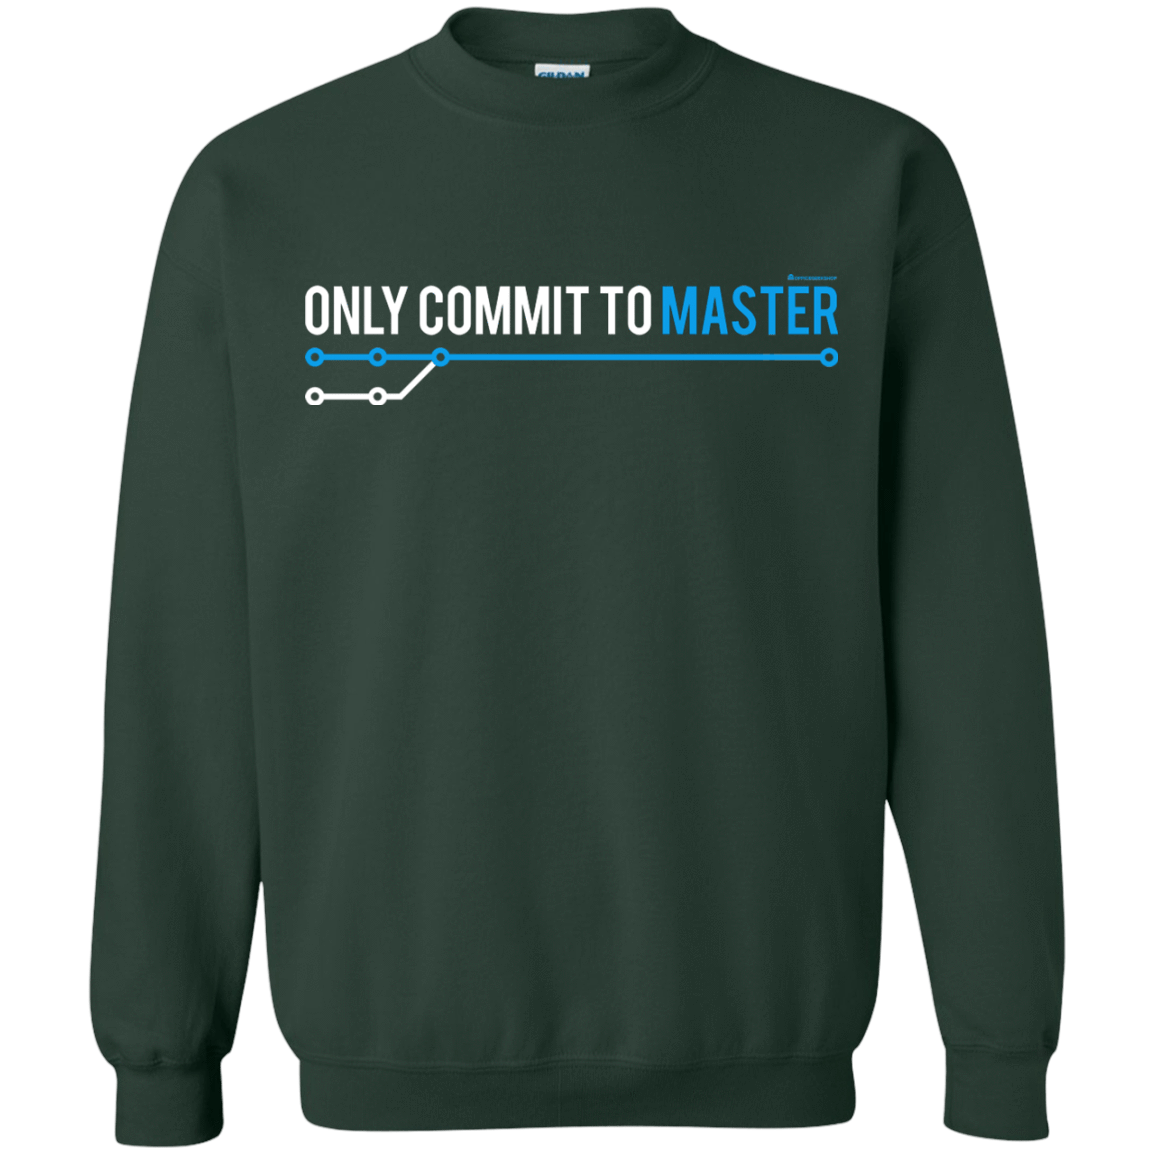 Sweatshirts Forest Green / Small Only Commit To Master Crewneck Sweatshirt